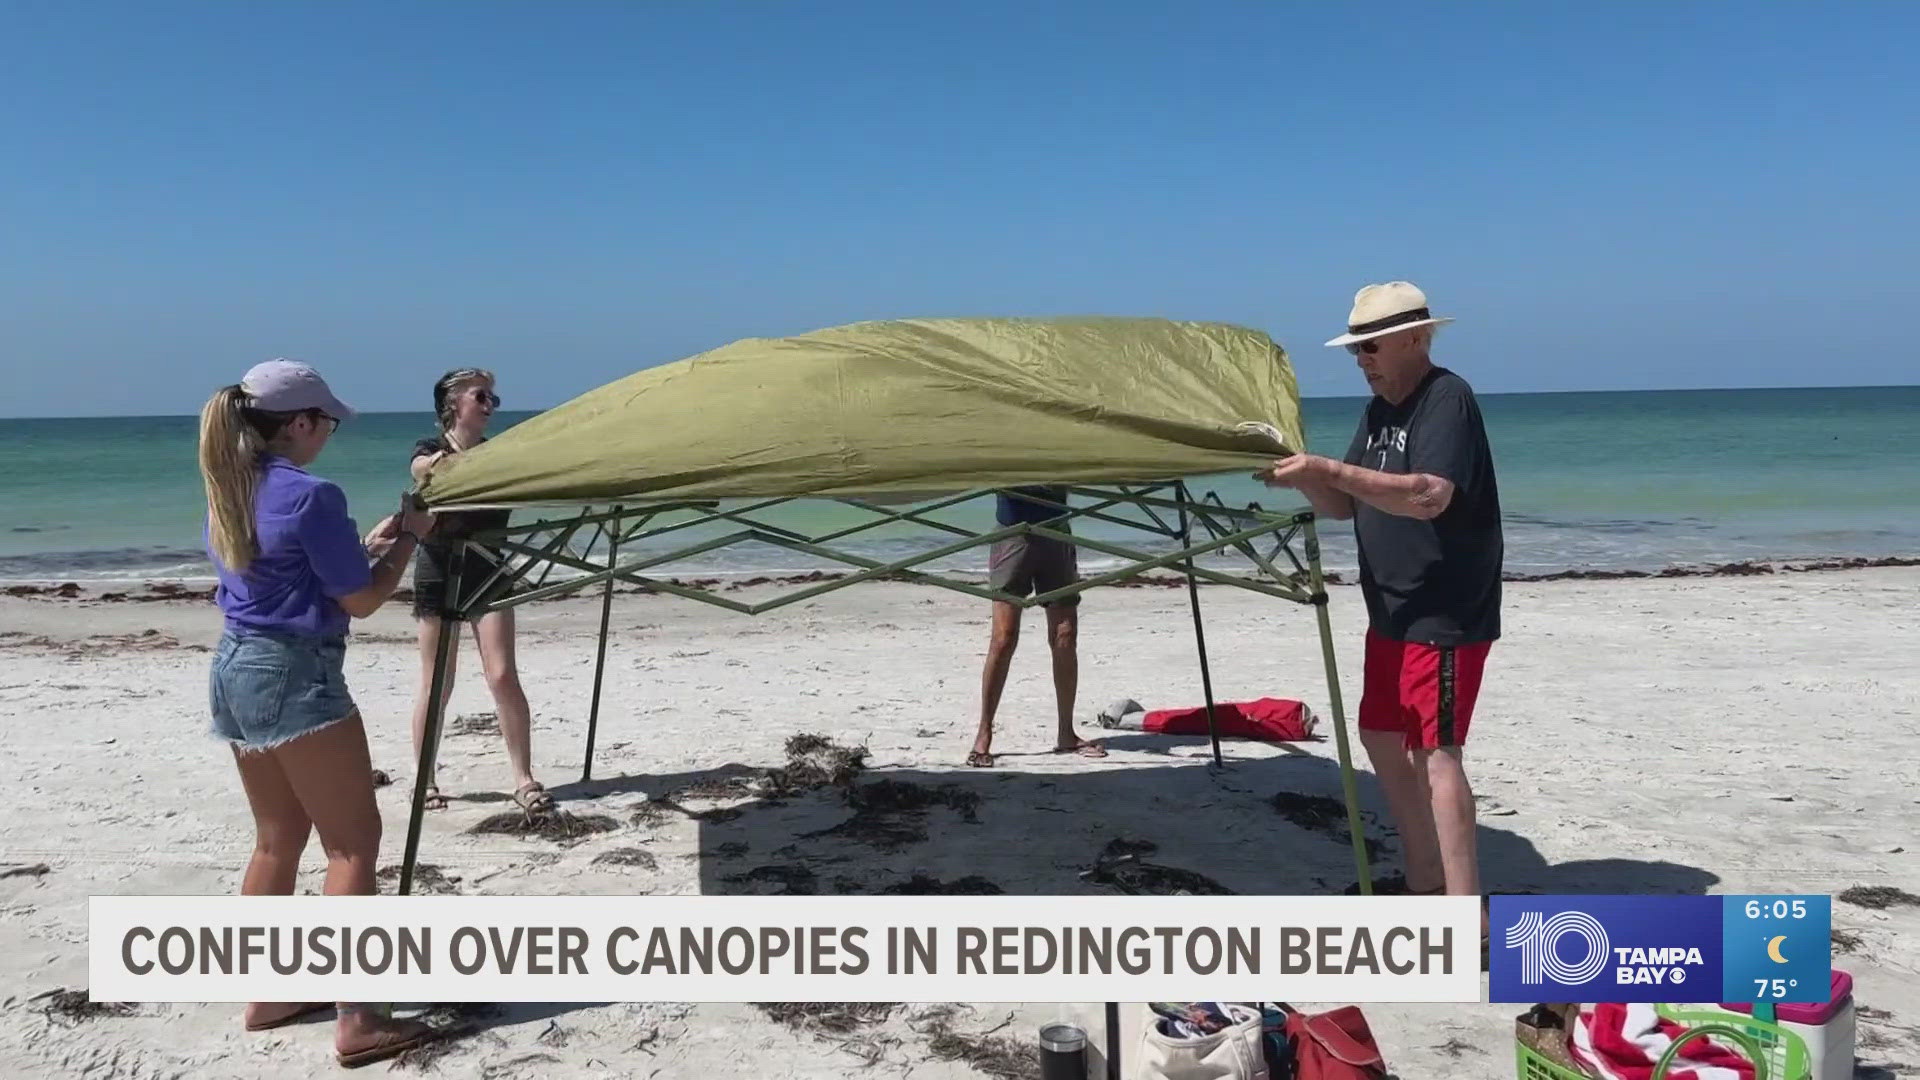 A woman at the beach said she was told her canopy wasn't allowed on the premises.